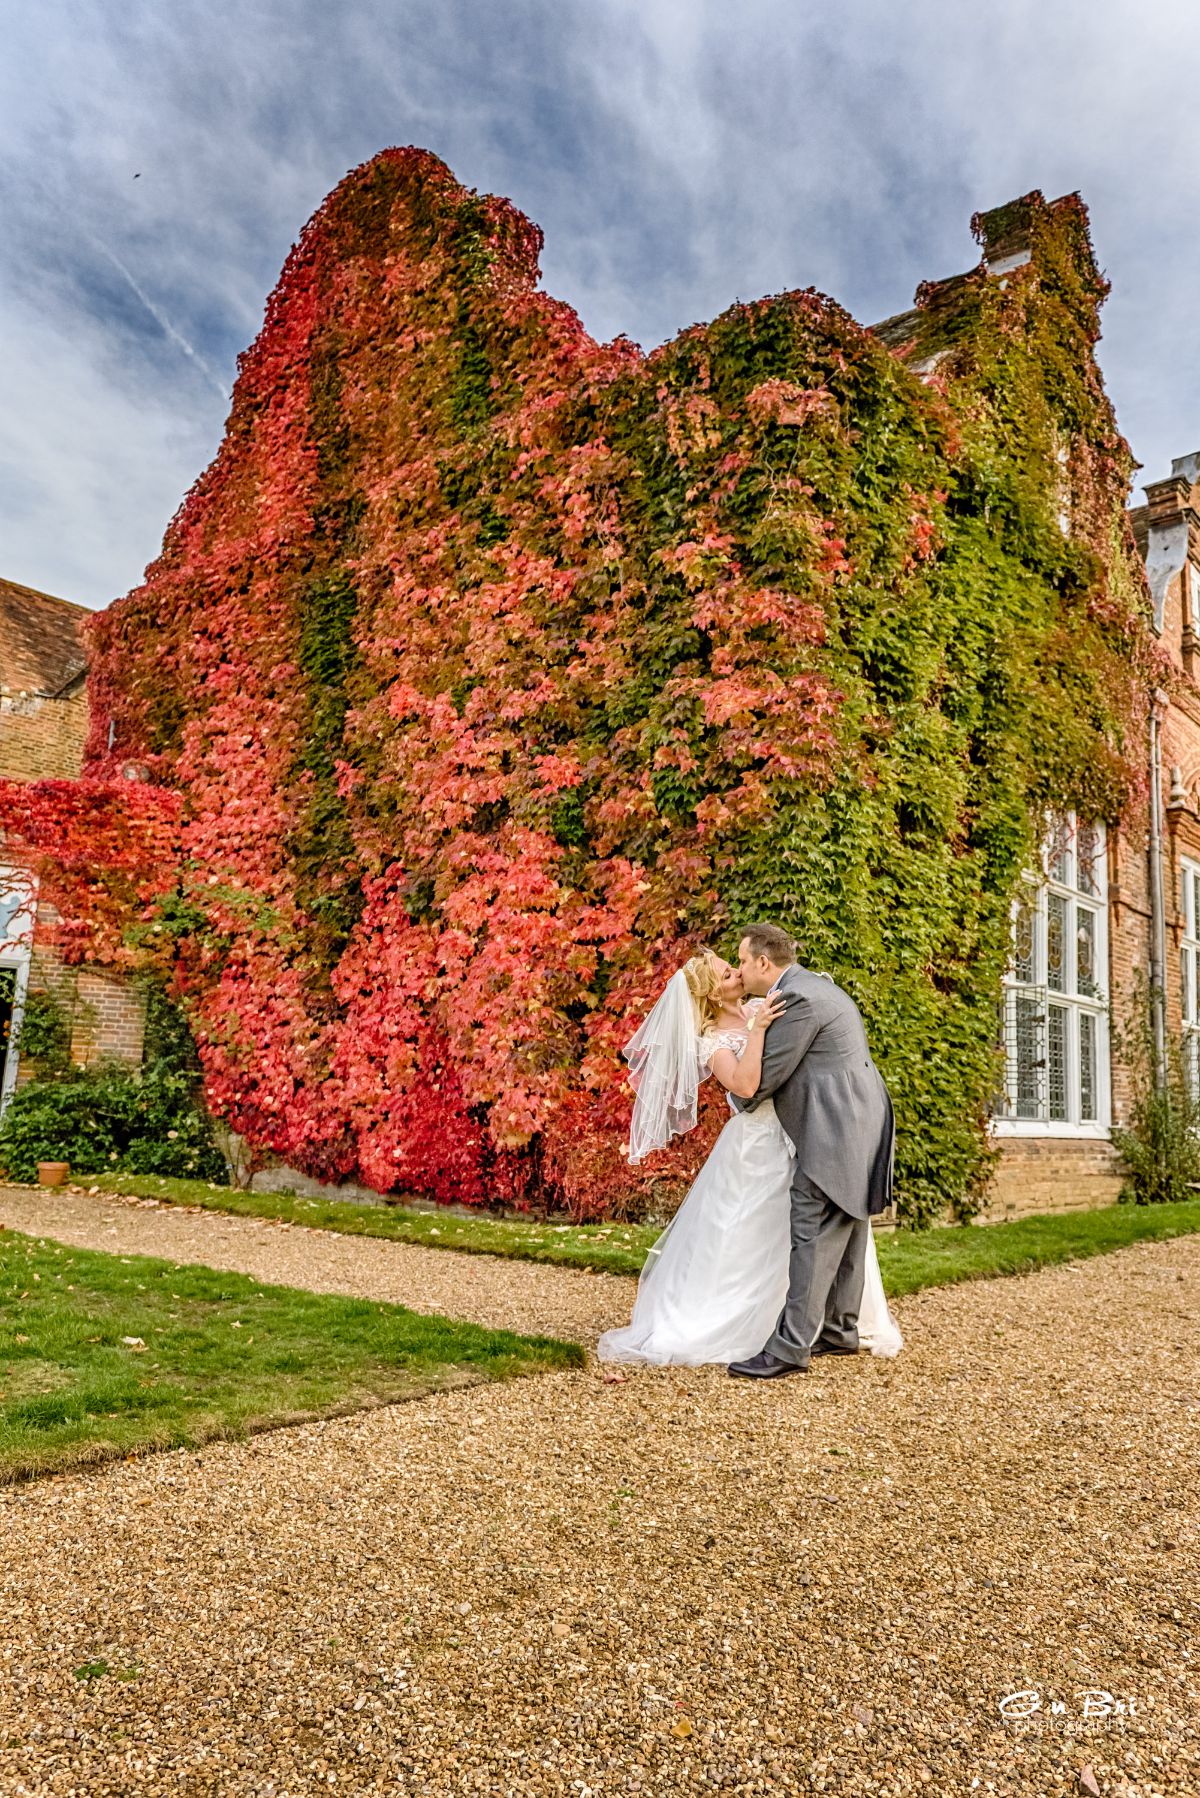 Stealing a kiss in front of the Manor, adorned with its glorious, orange and red autumn colours.